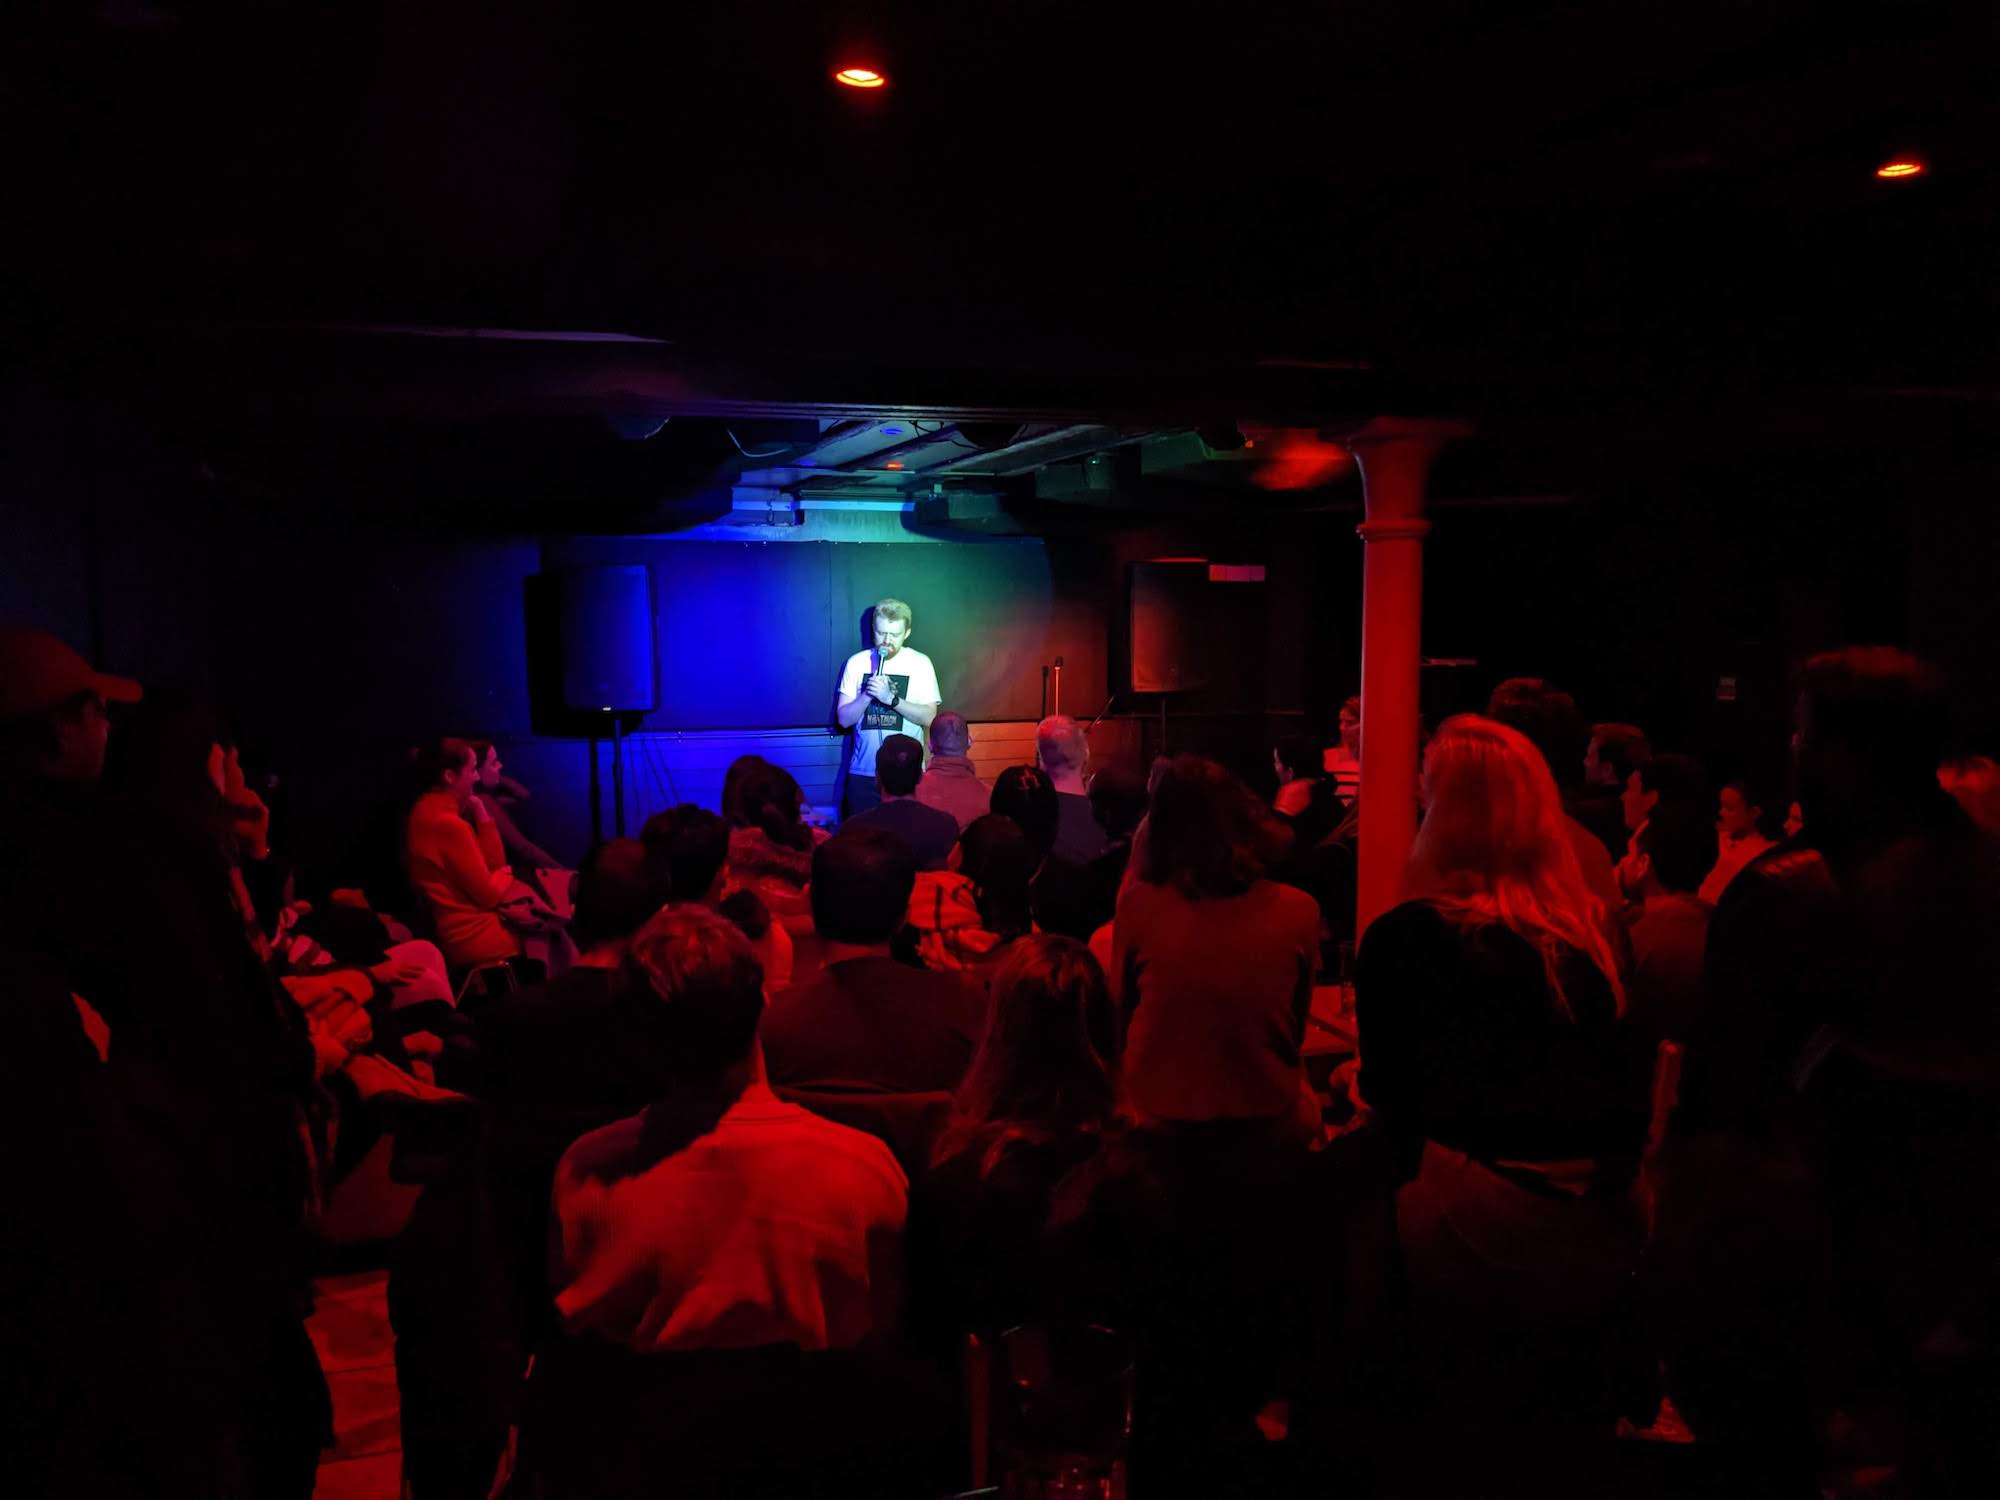 Standup comedy show in Dalston featuring Funny London Comedian